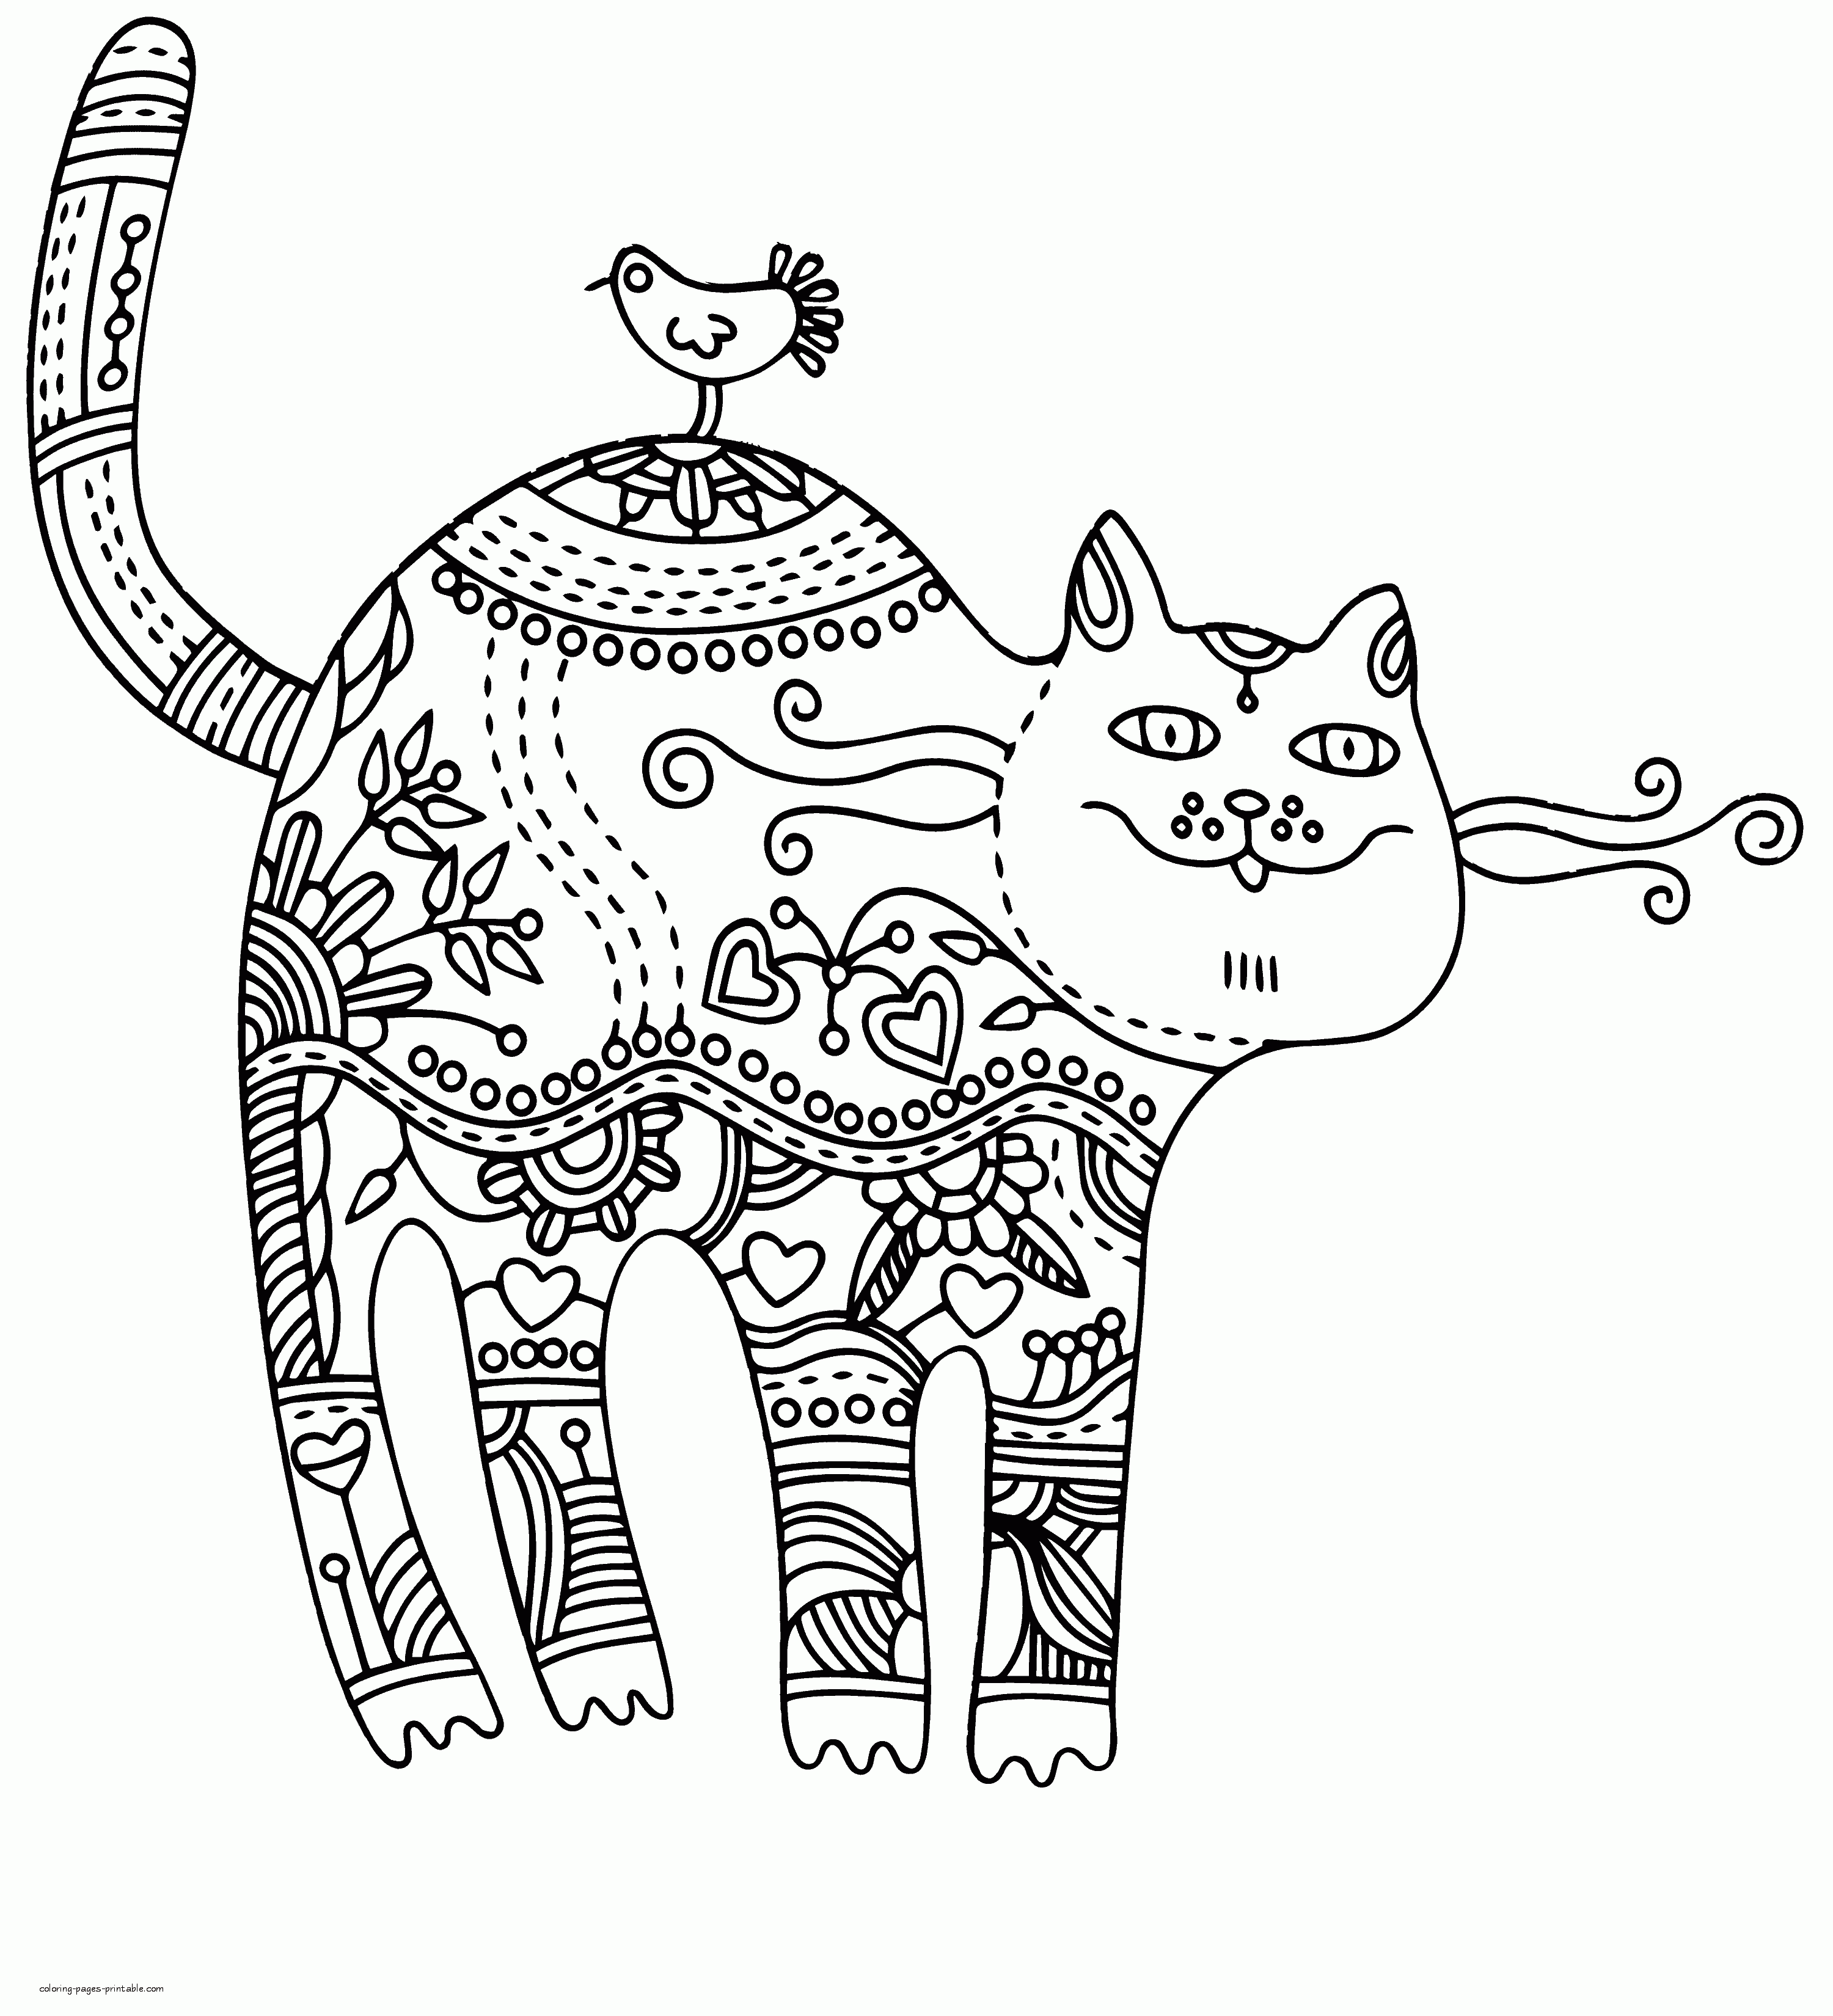 Free Animal Coloring Pages For Adults || COLORING-PAGES-PRINTABLE.COM